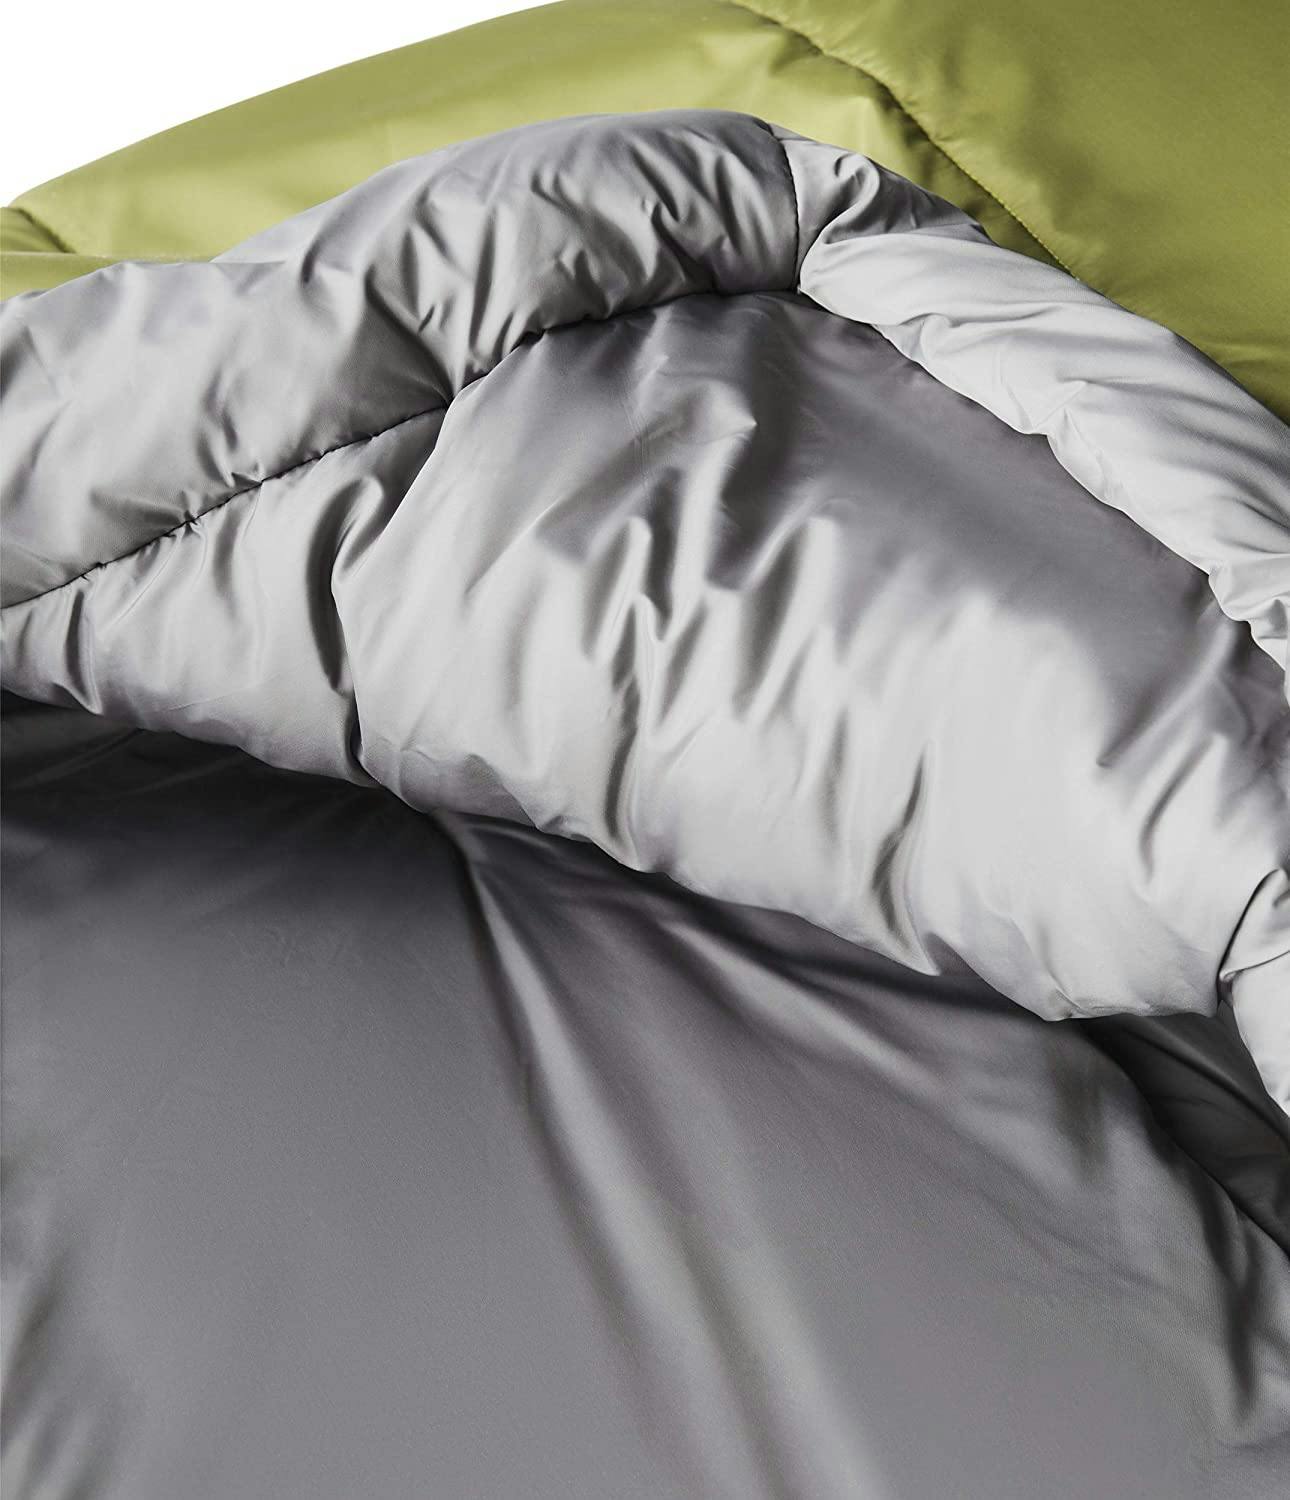 The North Face Wasatch 0 Sleeping Bag - Men's